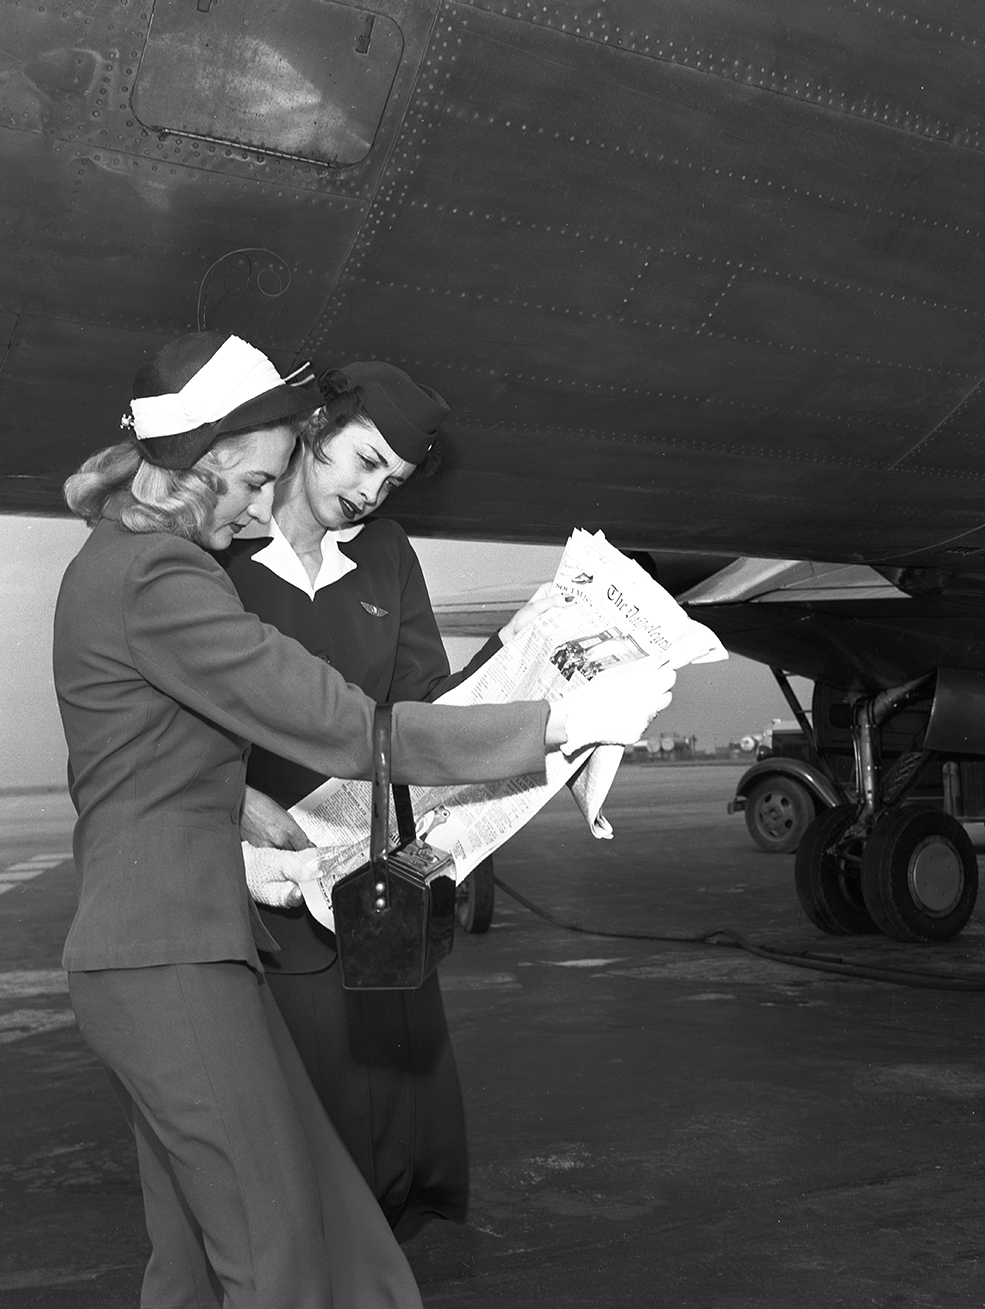 Two young women in tailored jackets and skirts read a newspaper together on a tarmac beside an airplane.